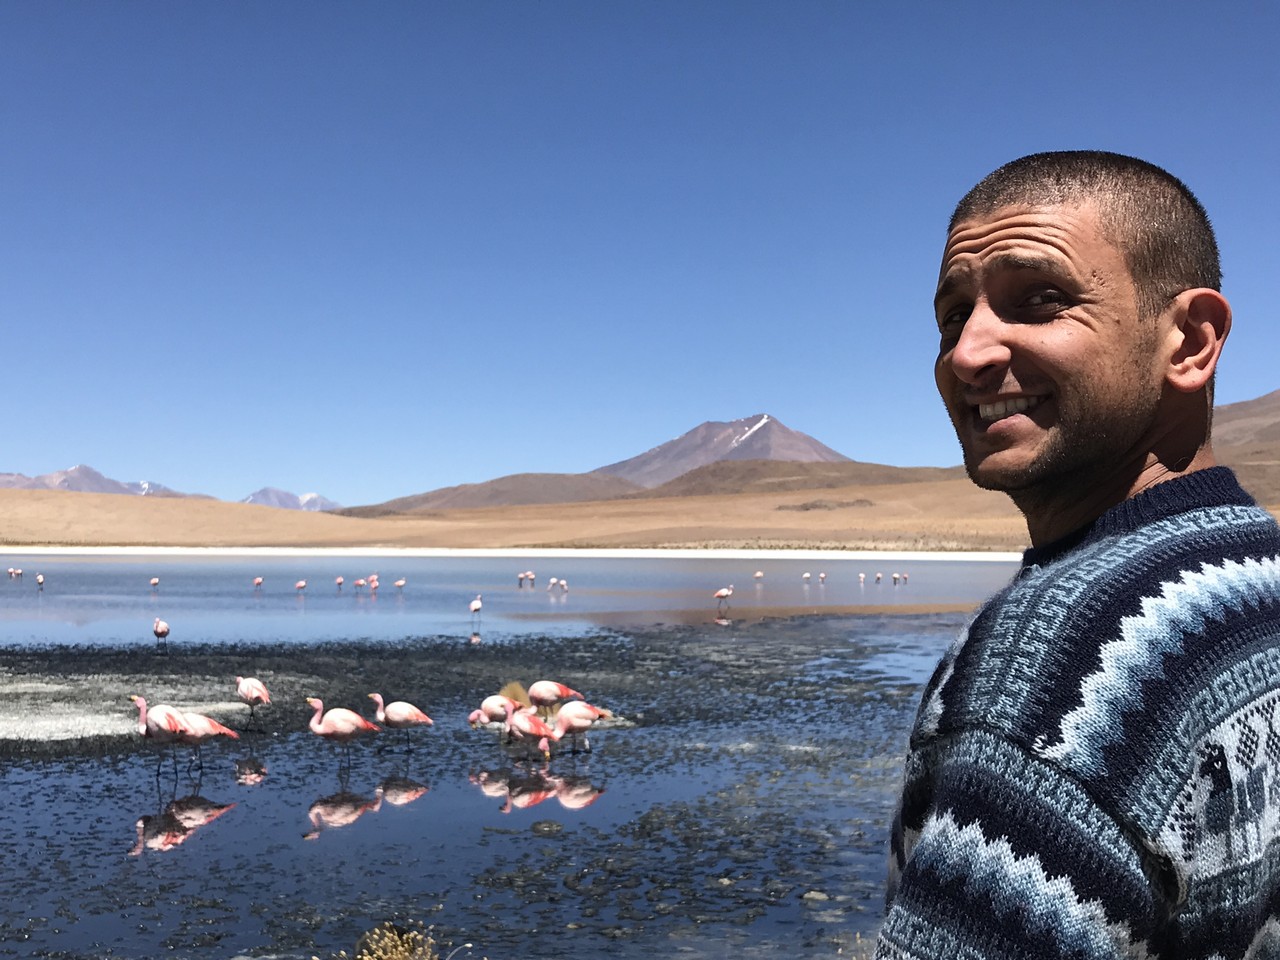 a man standing in a body of water with flamingos in the background